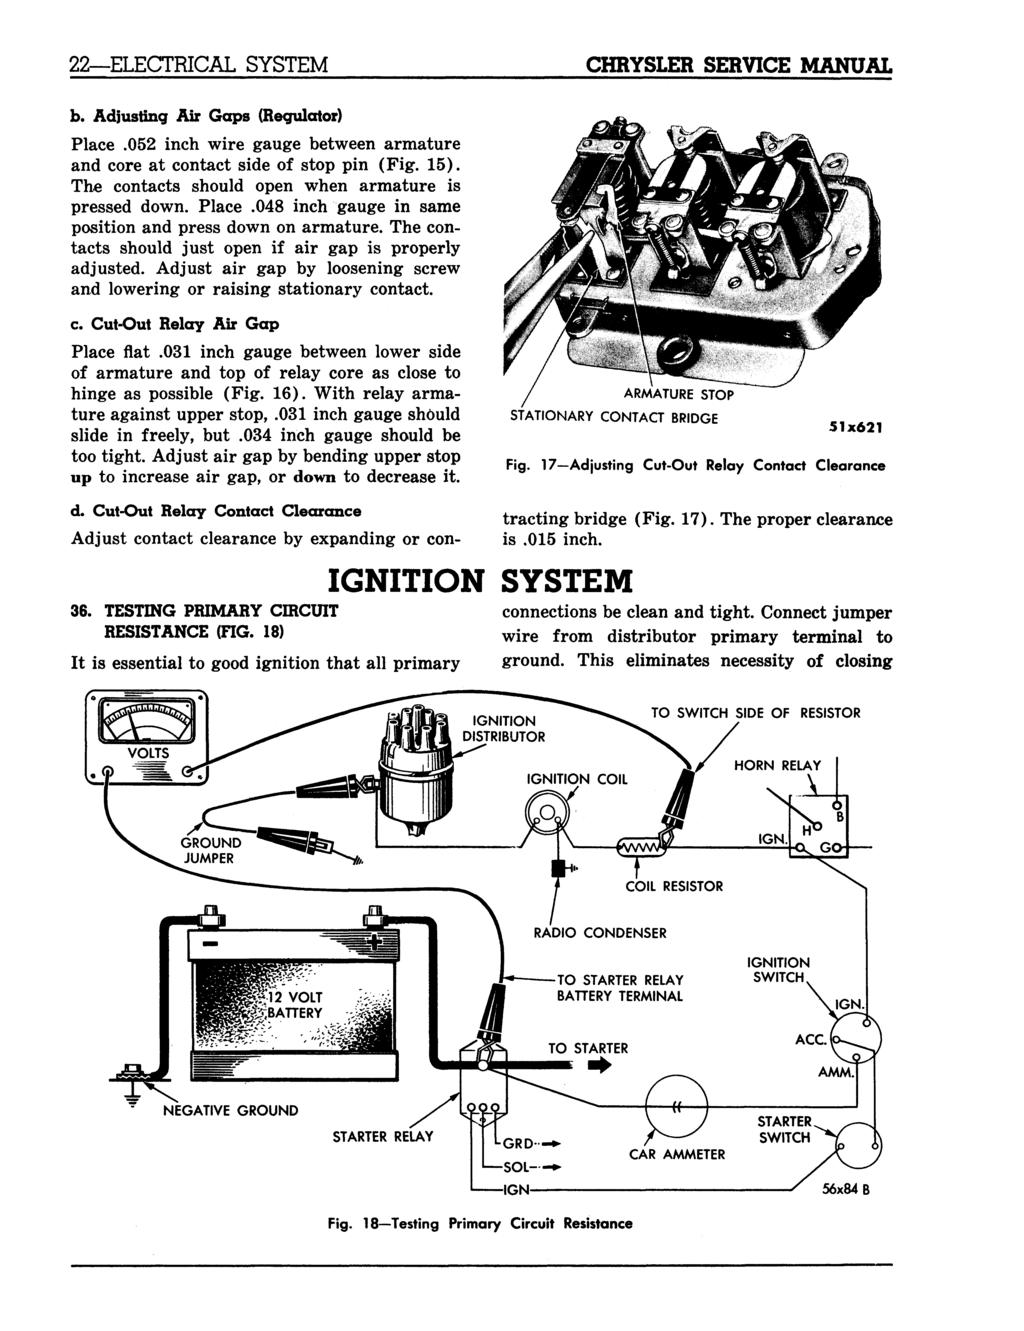 22 ELECTRICAL SYSTEM CHRYSLER SERVICE MANUAL b. Adjusting Air Gaps (Regulator) Place.052 inch wire gauge between armature and core at contact side of stop pin (Fig. 15).